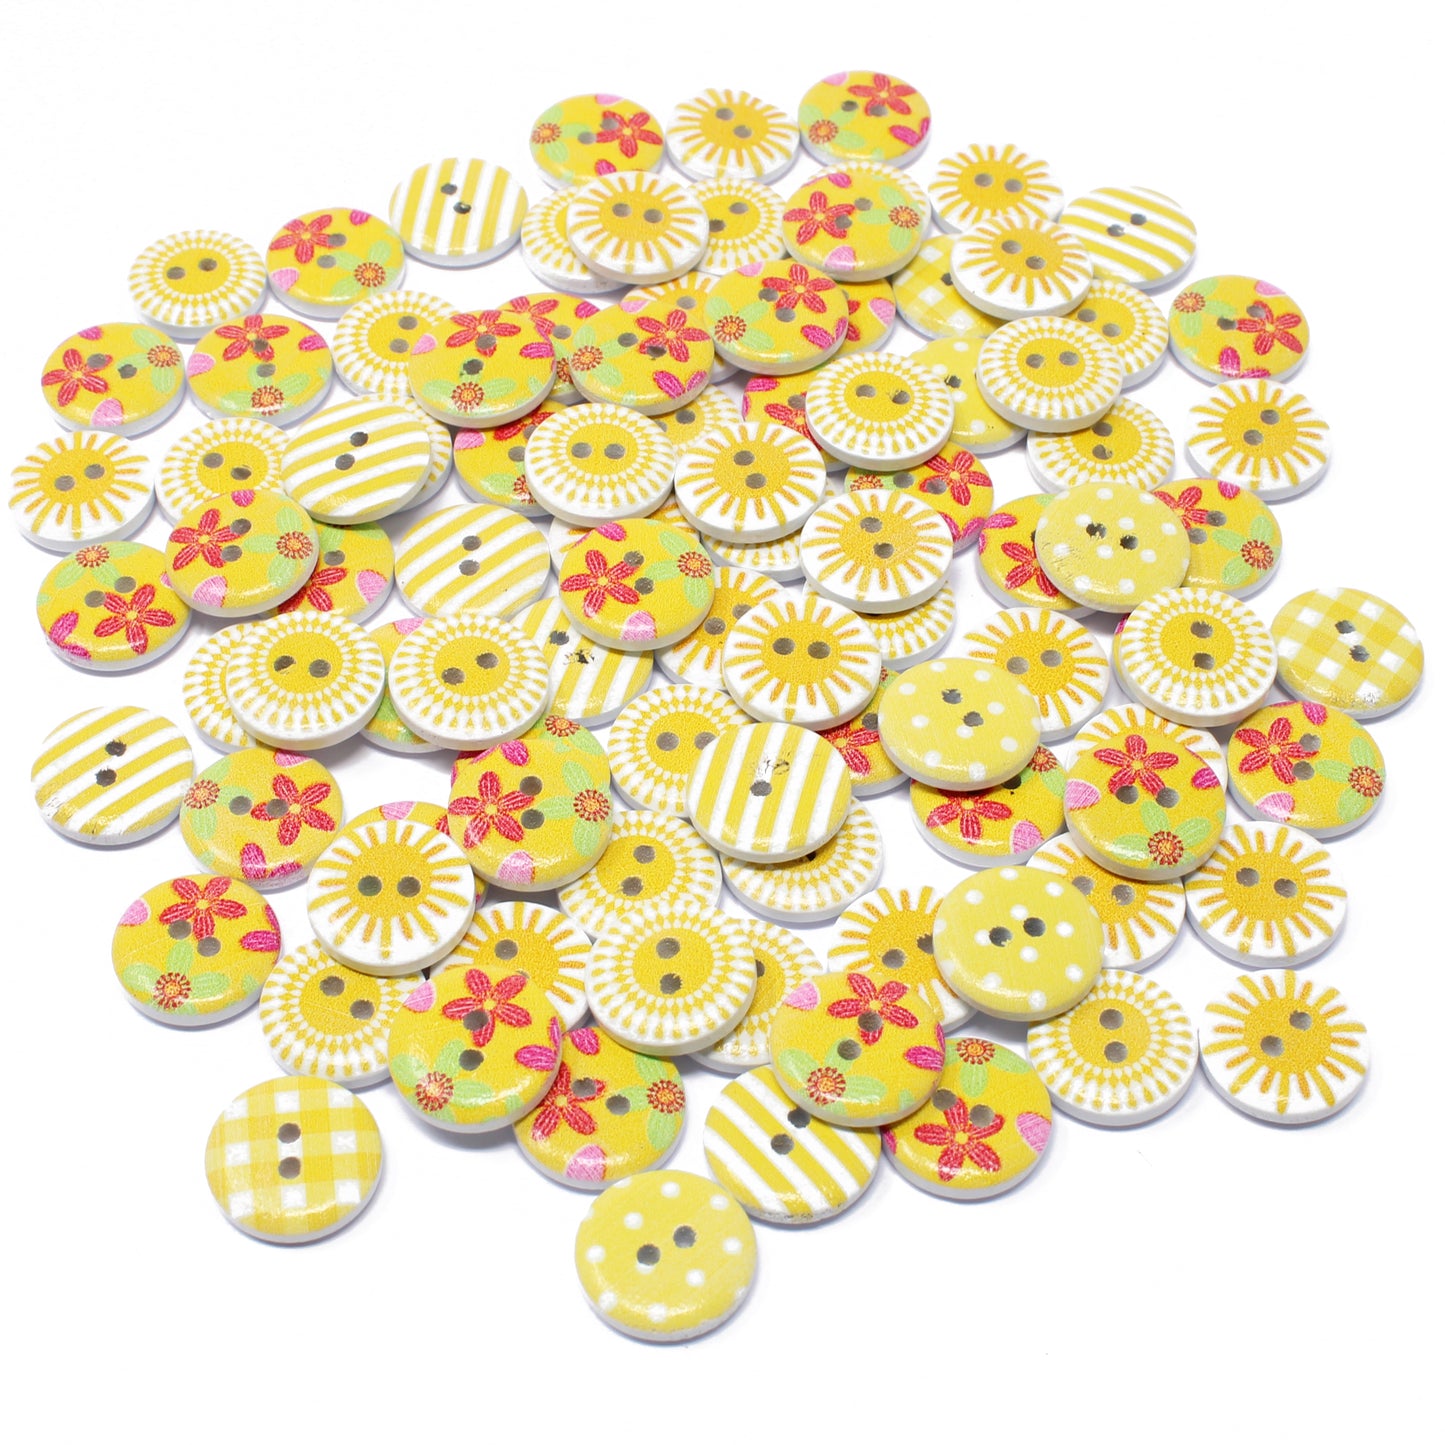 Yellow Mix 100 Mixed 15mm Round Wooden Craft Buttons